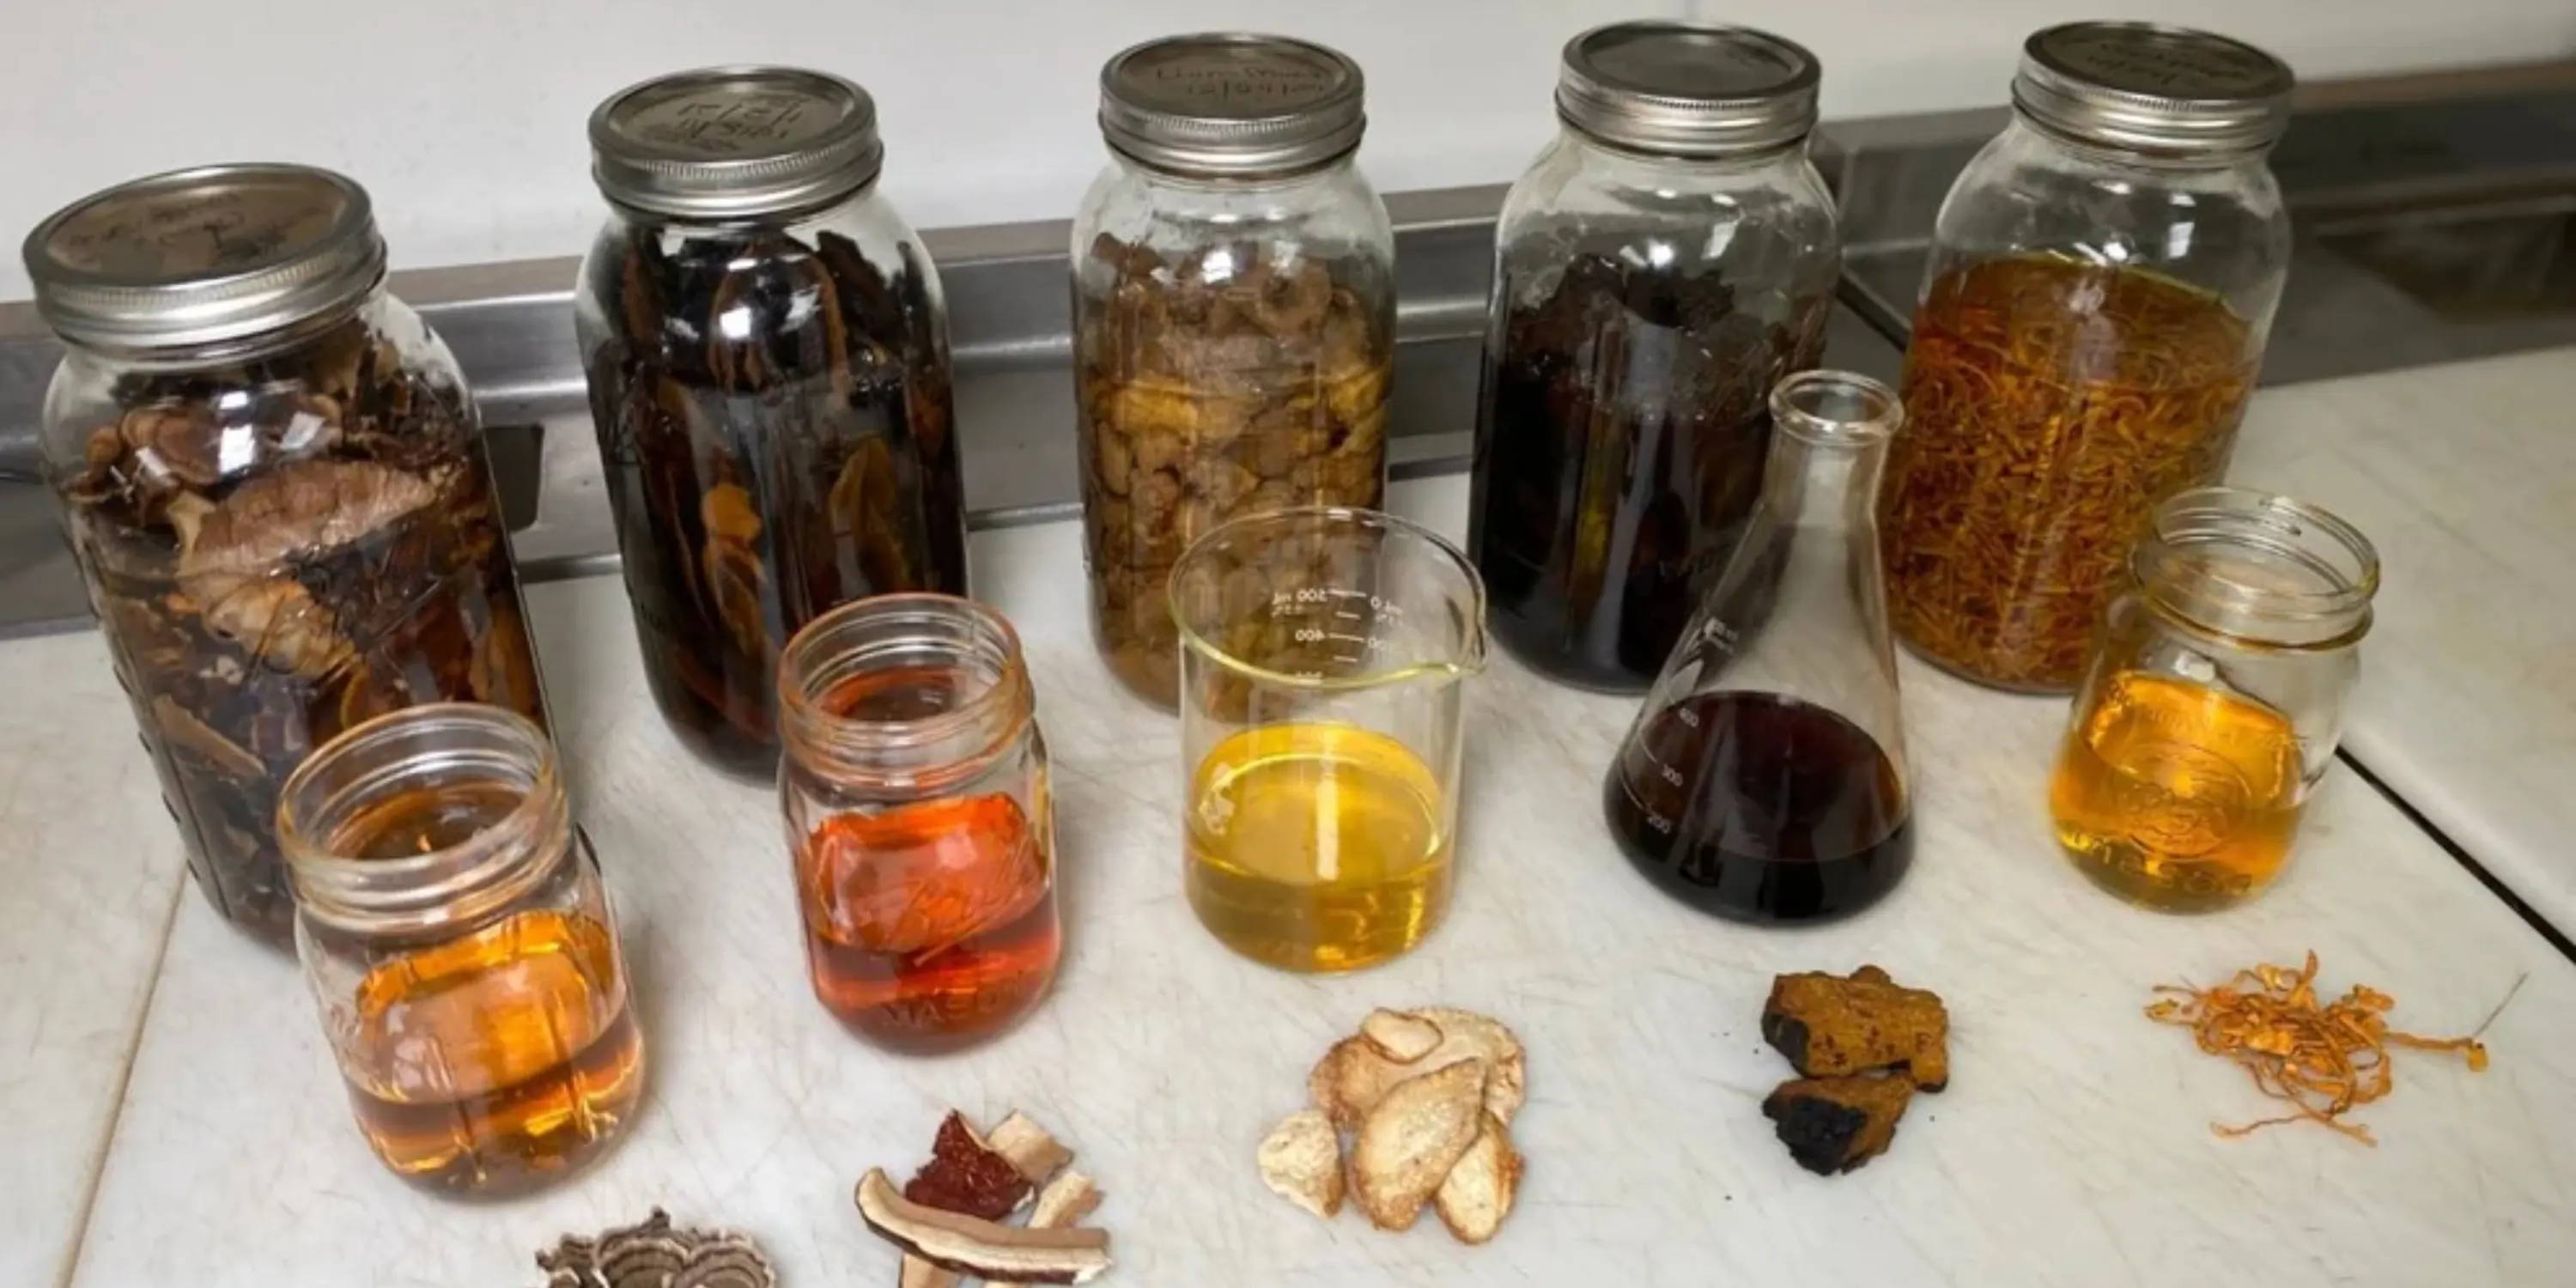 Mushroom alcohol extracts and hot water extracts - chaga, lion's mane, maitake, reishi, turkey tail